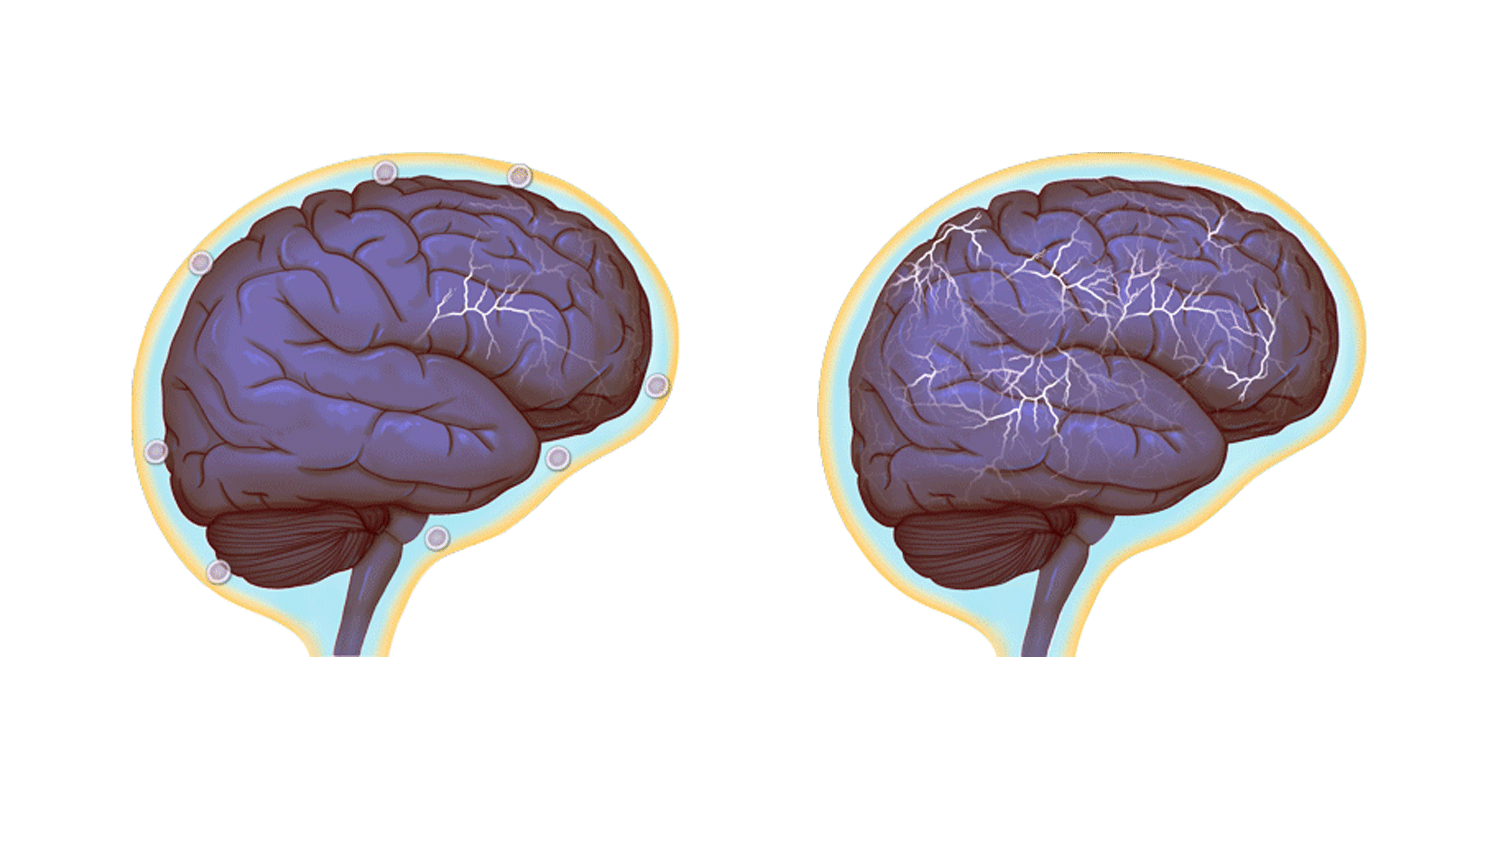 Images of normal brain activity, left, and of a hyper-connected brain. (Images by Anita Impagliazzo, UVA Health System)